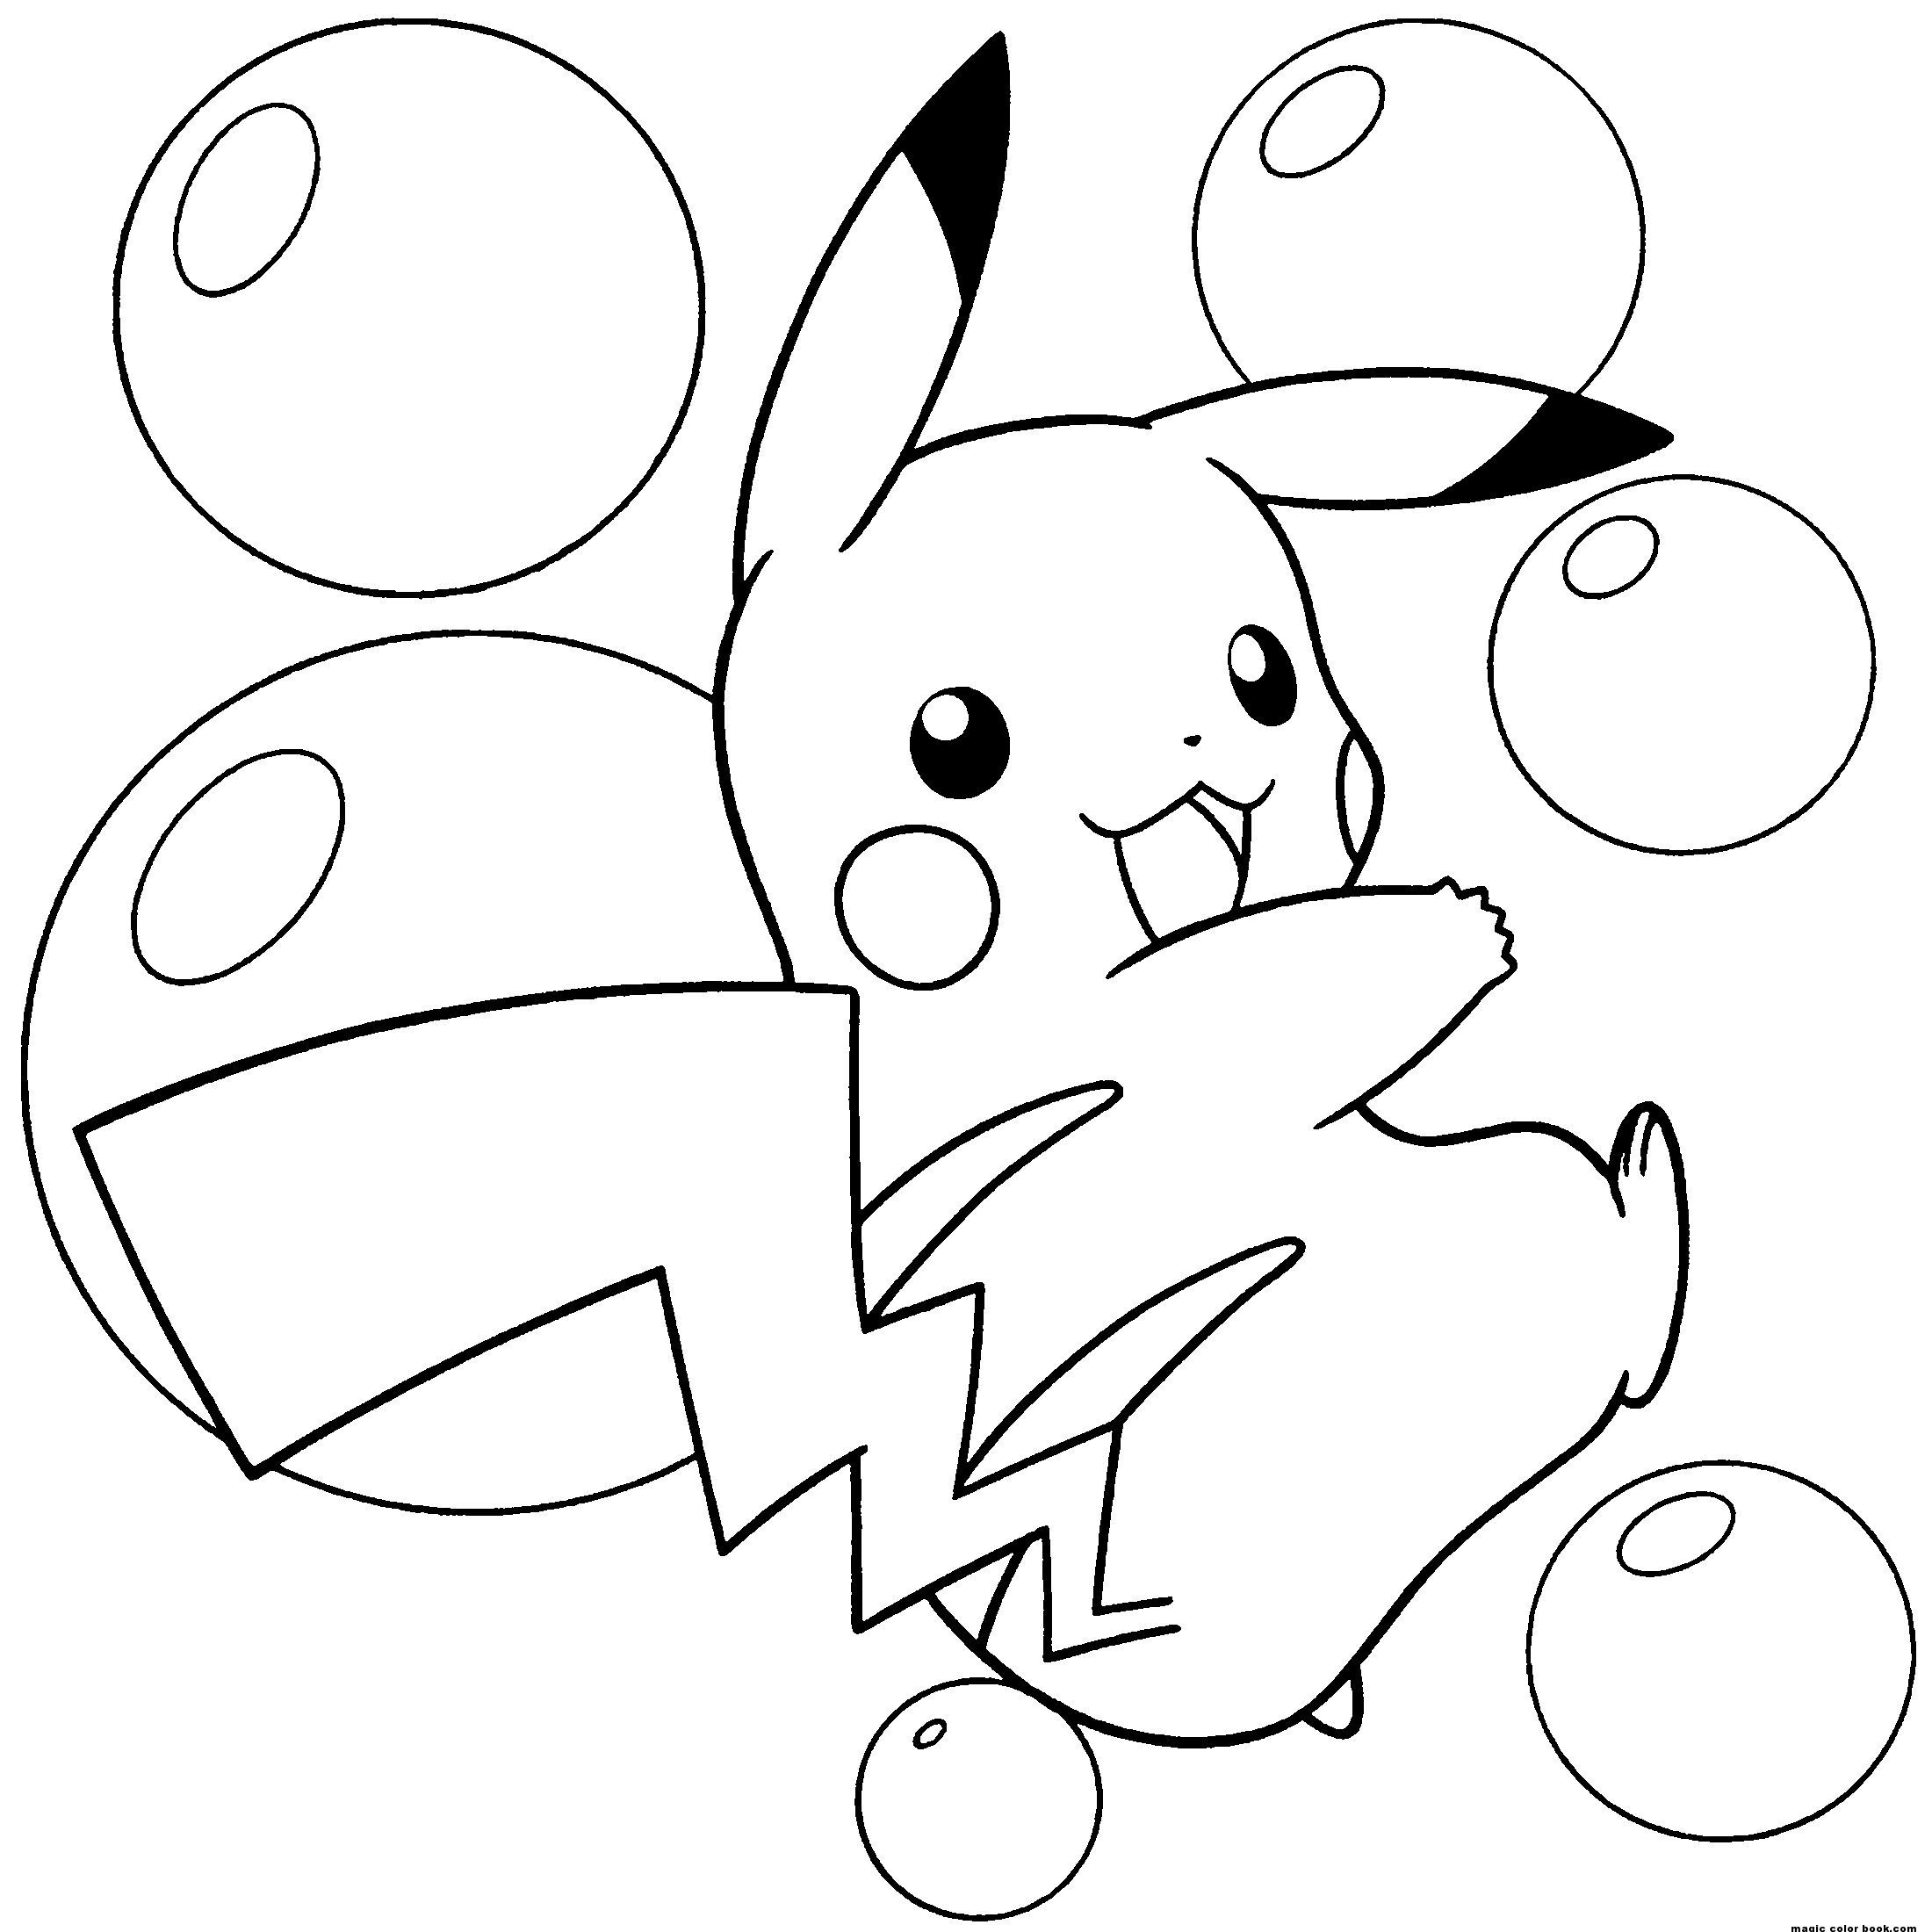 Cool Pokemon 15 Coloring Page